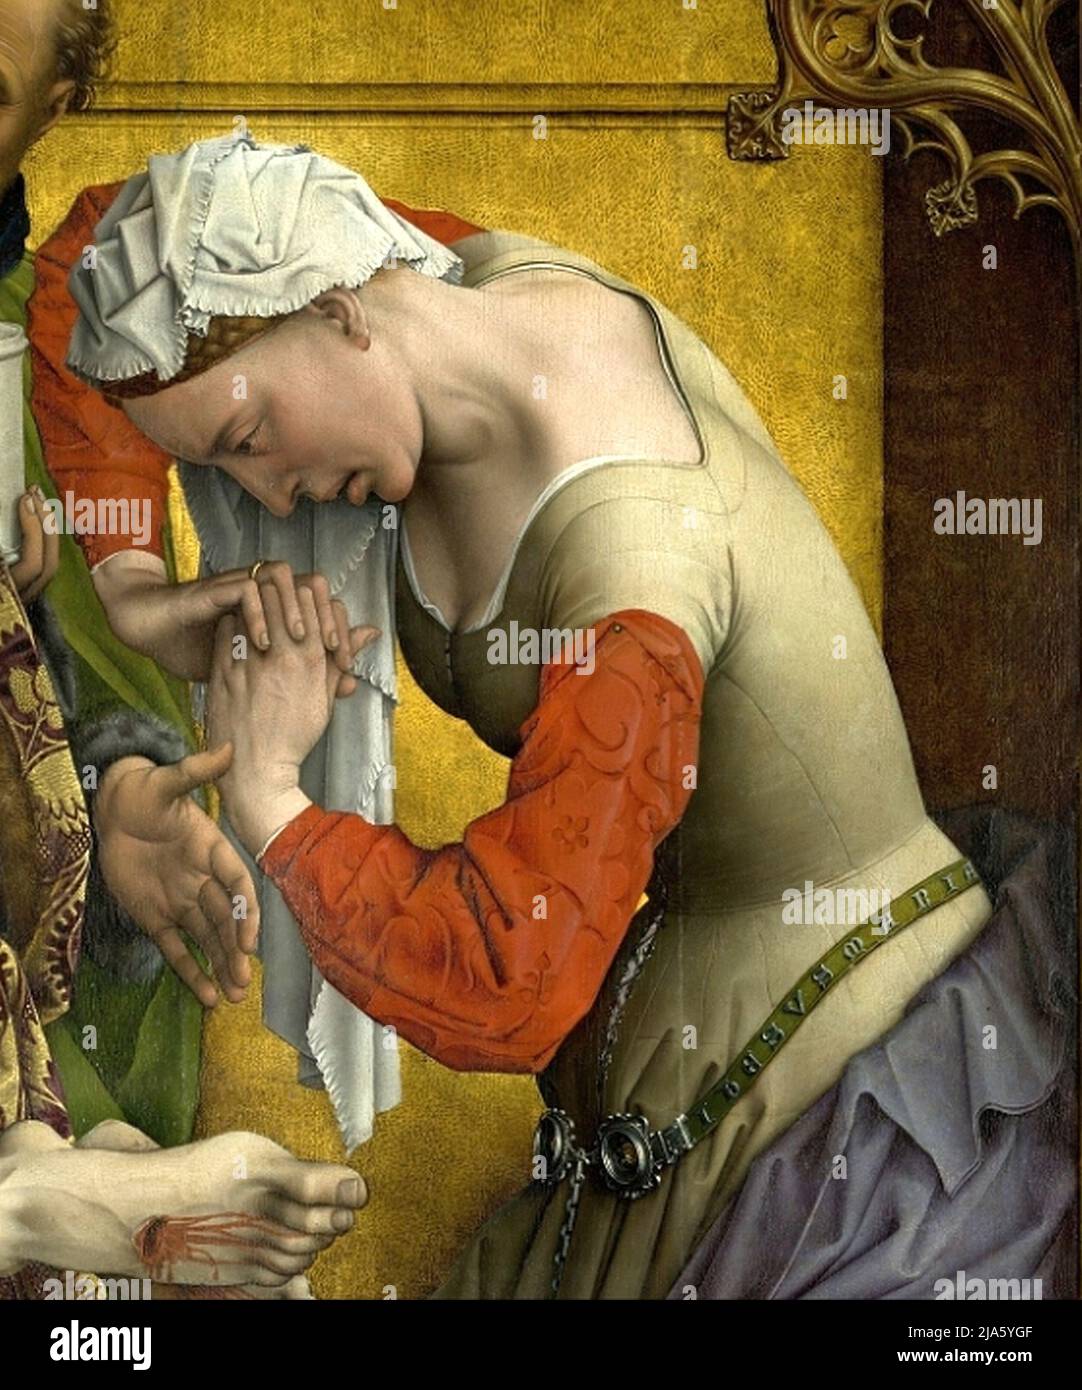 Detail of Mary Magdalene weeping at the crucifixion of Jesus, as portrayed in The Descent from the Cross by the Flemish artist Rogier van der Weyden Stock Photo